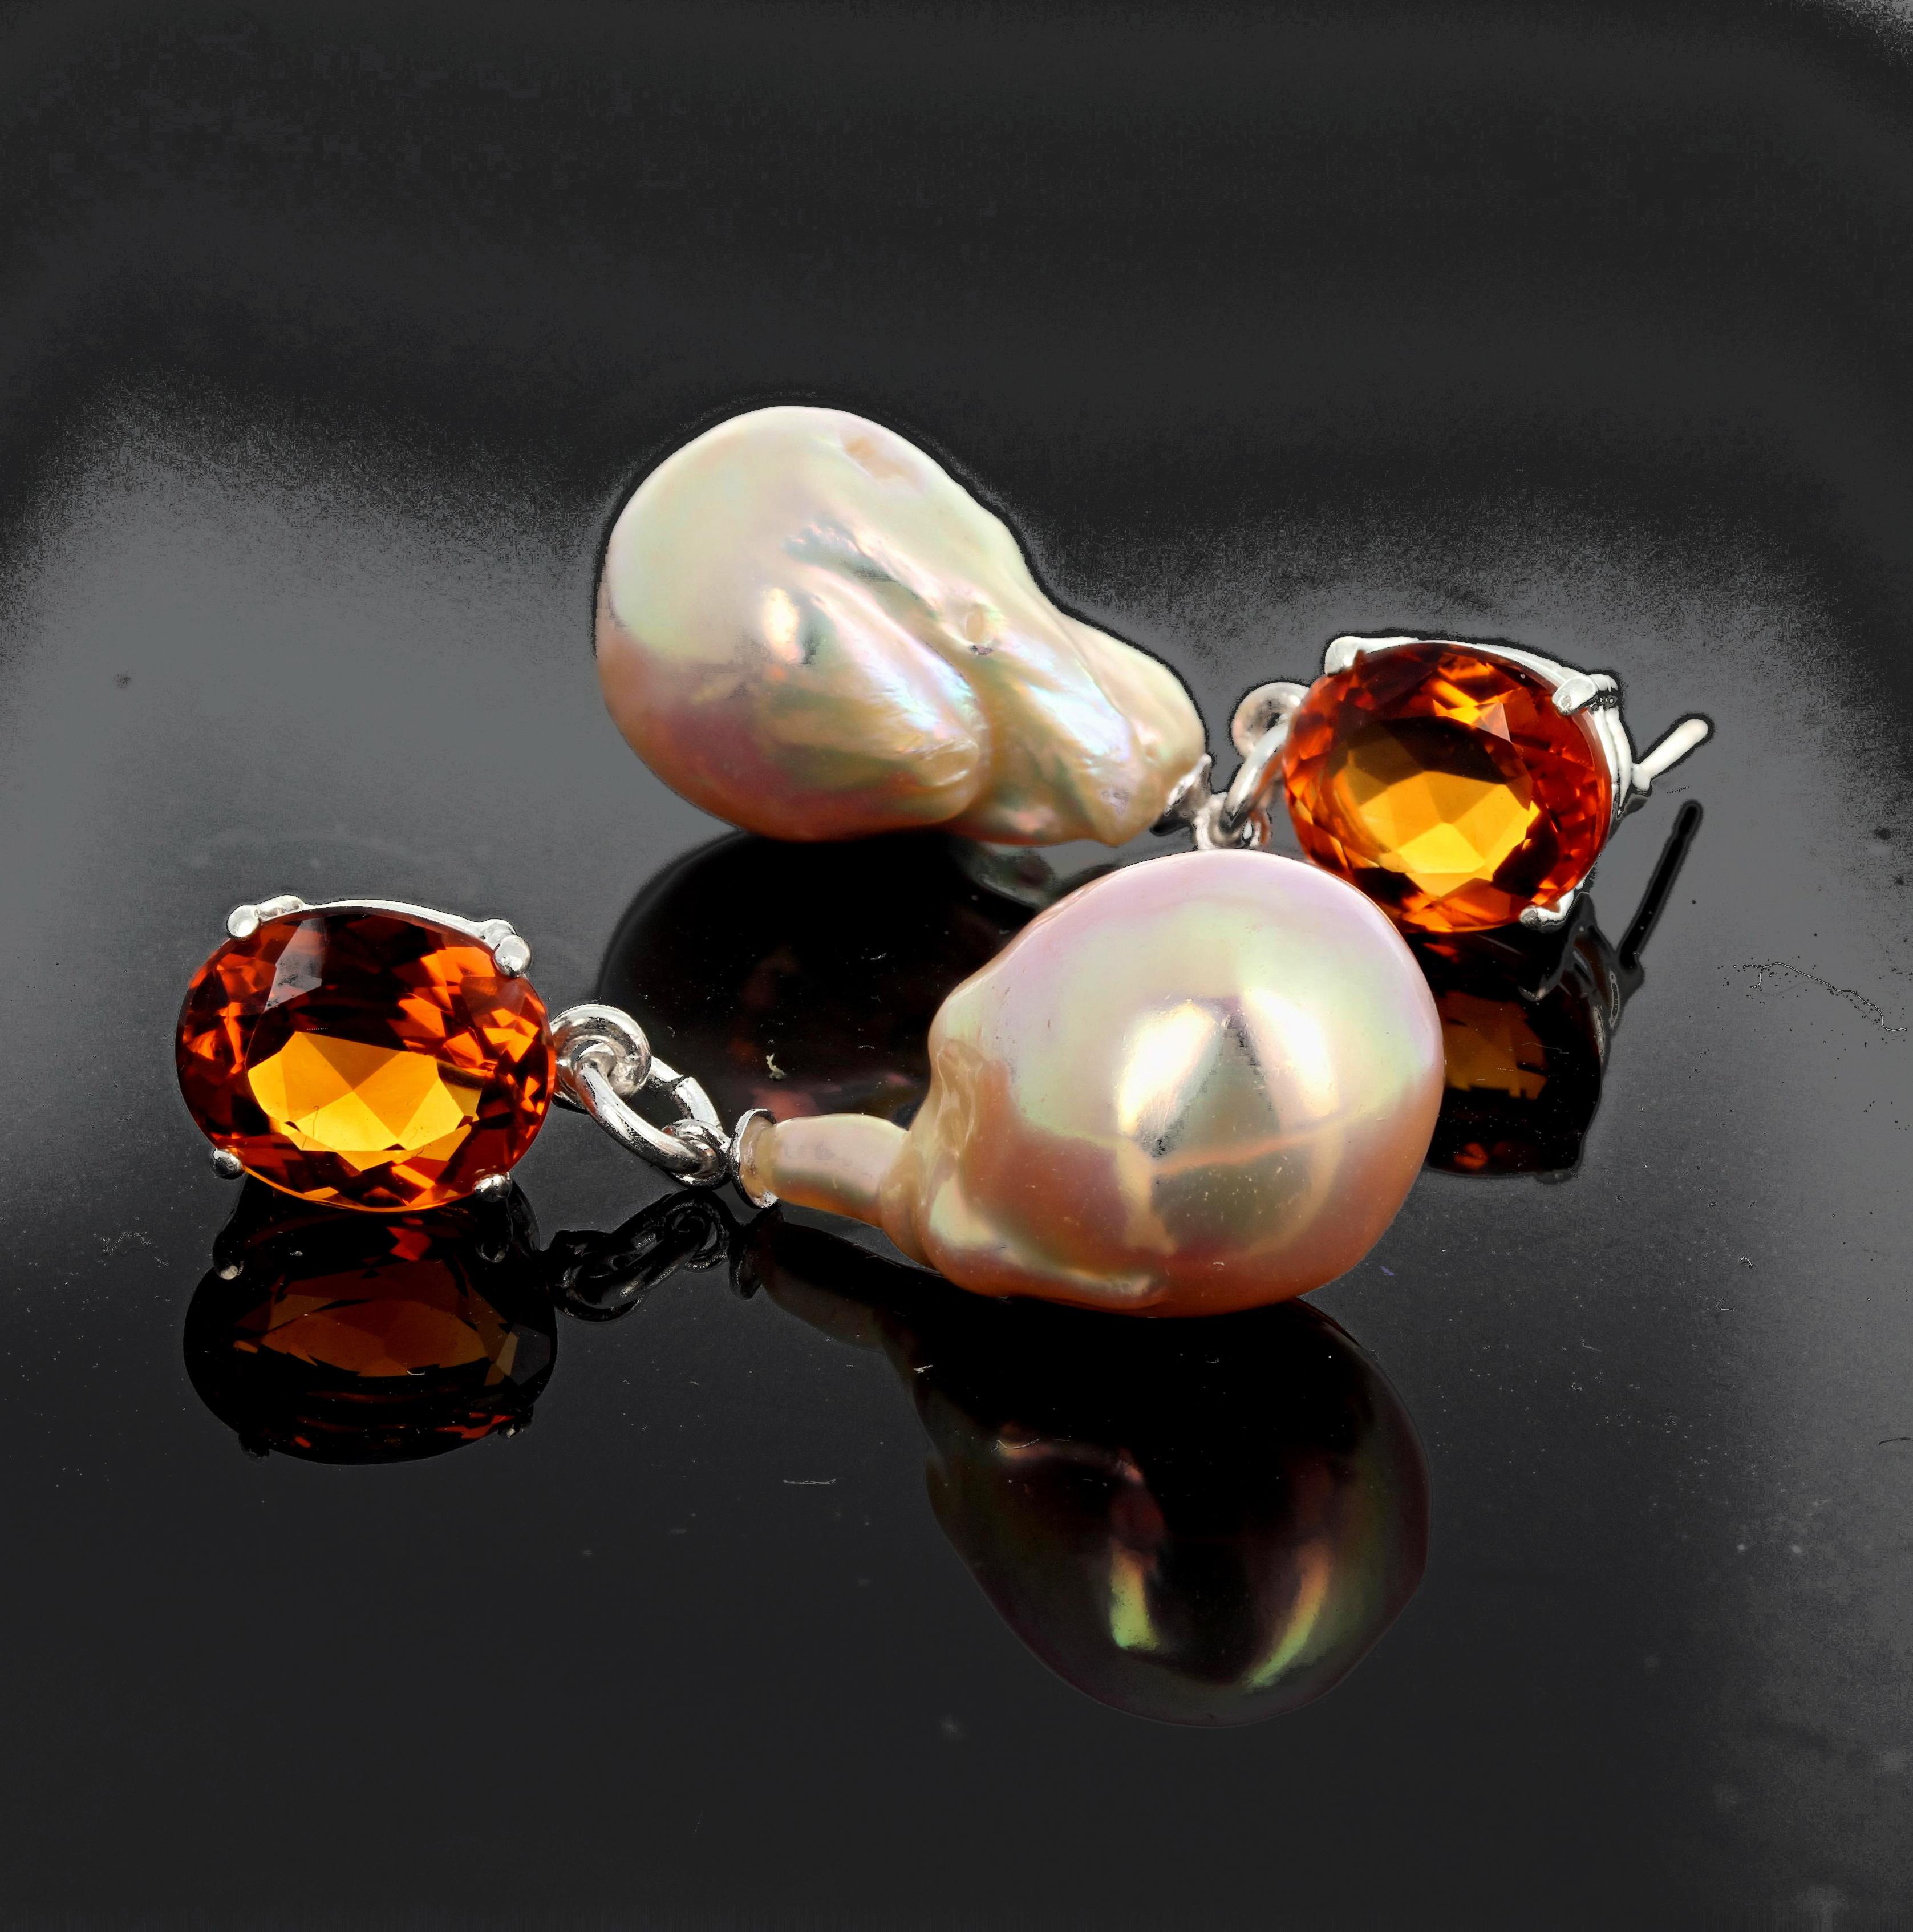 Glittering brilliant 6 carats total of matching oval Citrines cast their reflection on dangled goldy glowing cultured baroque Pearls on sterling silver stud earrings.  They hang approximately 1.53 inches long.  